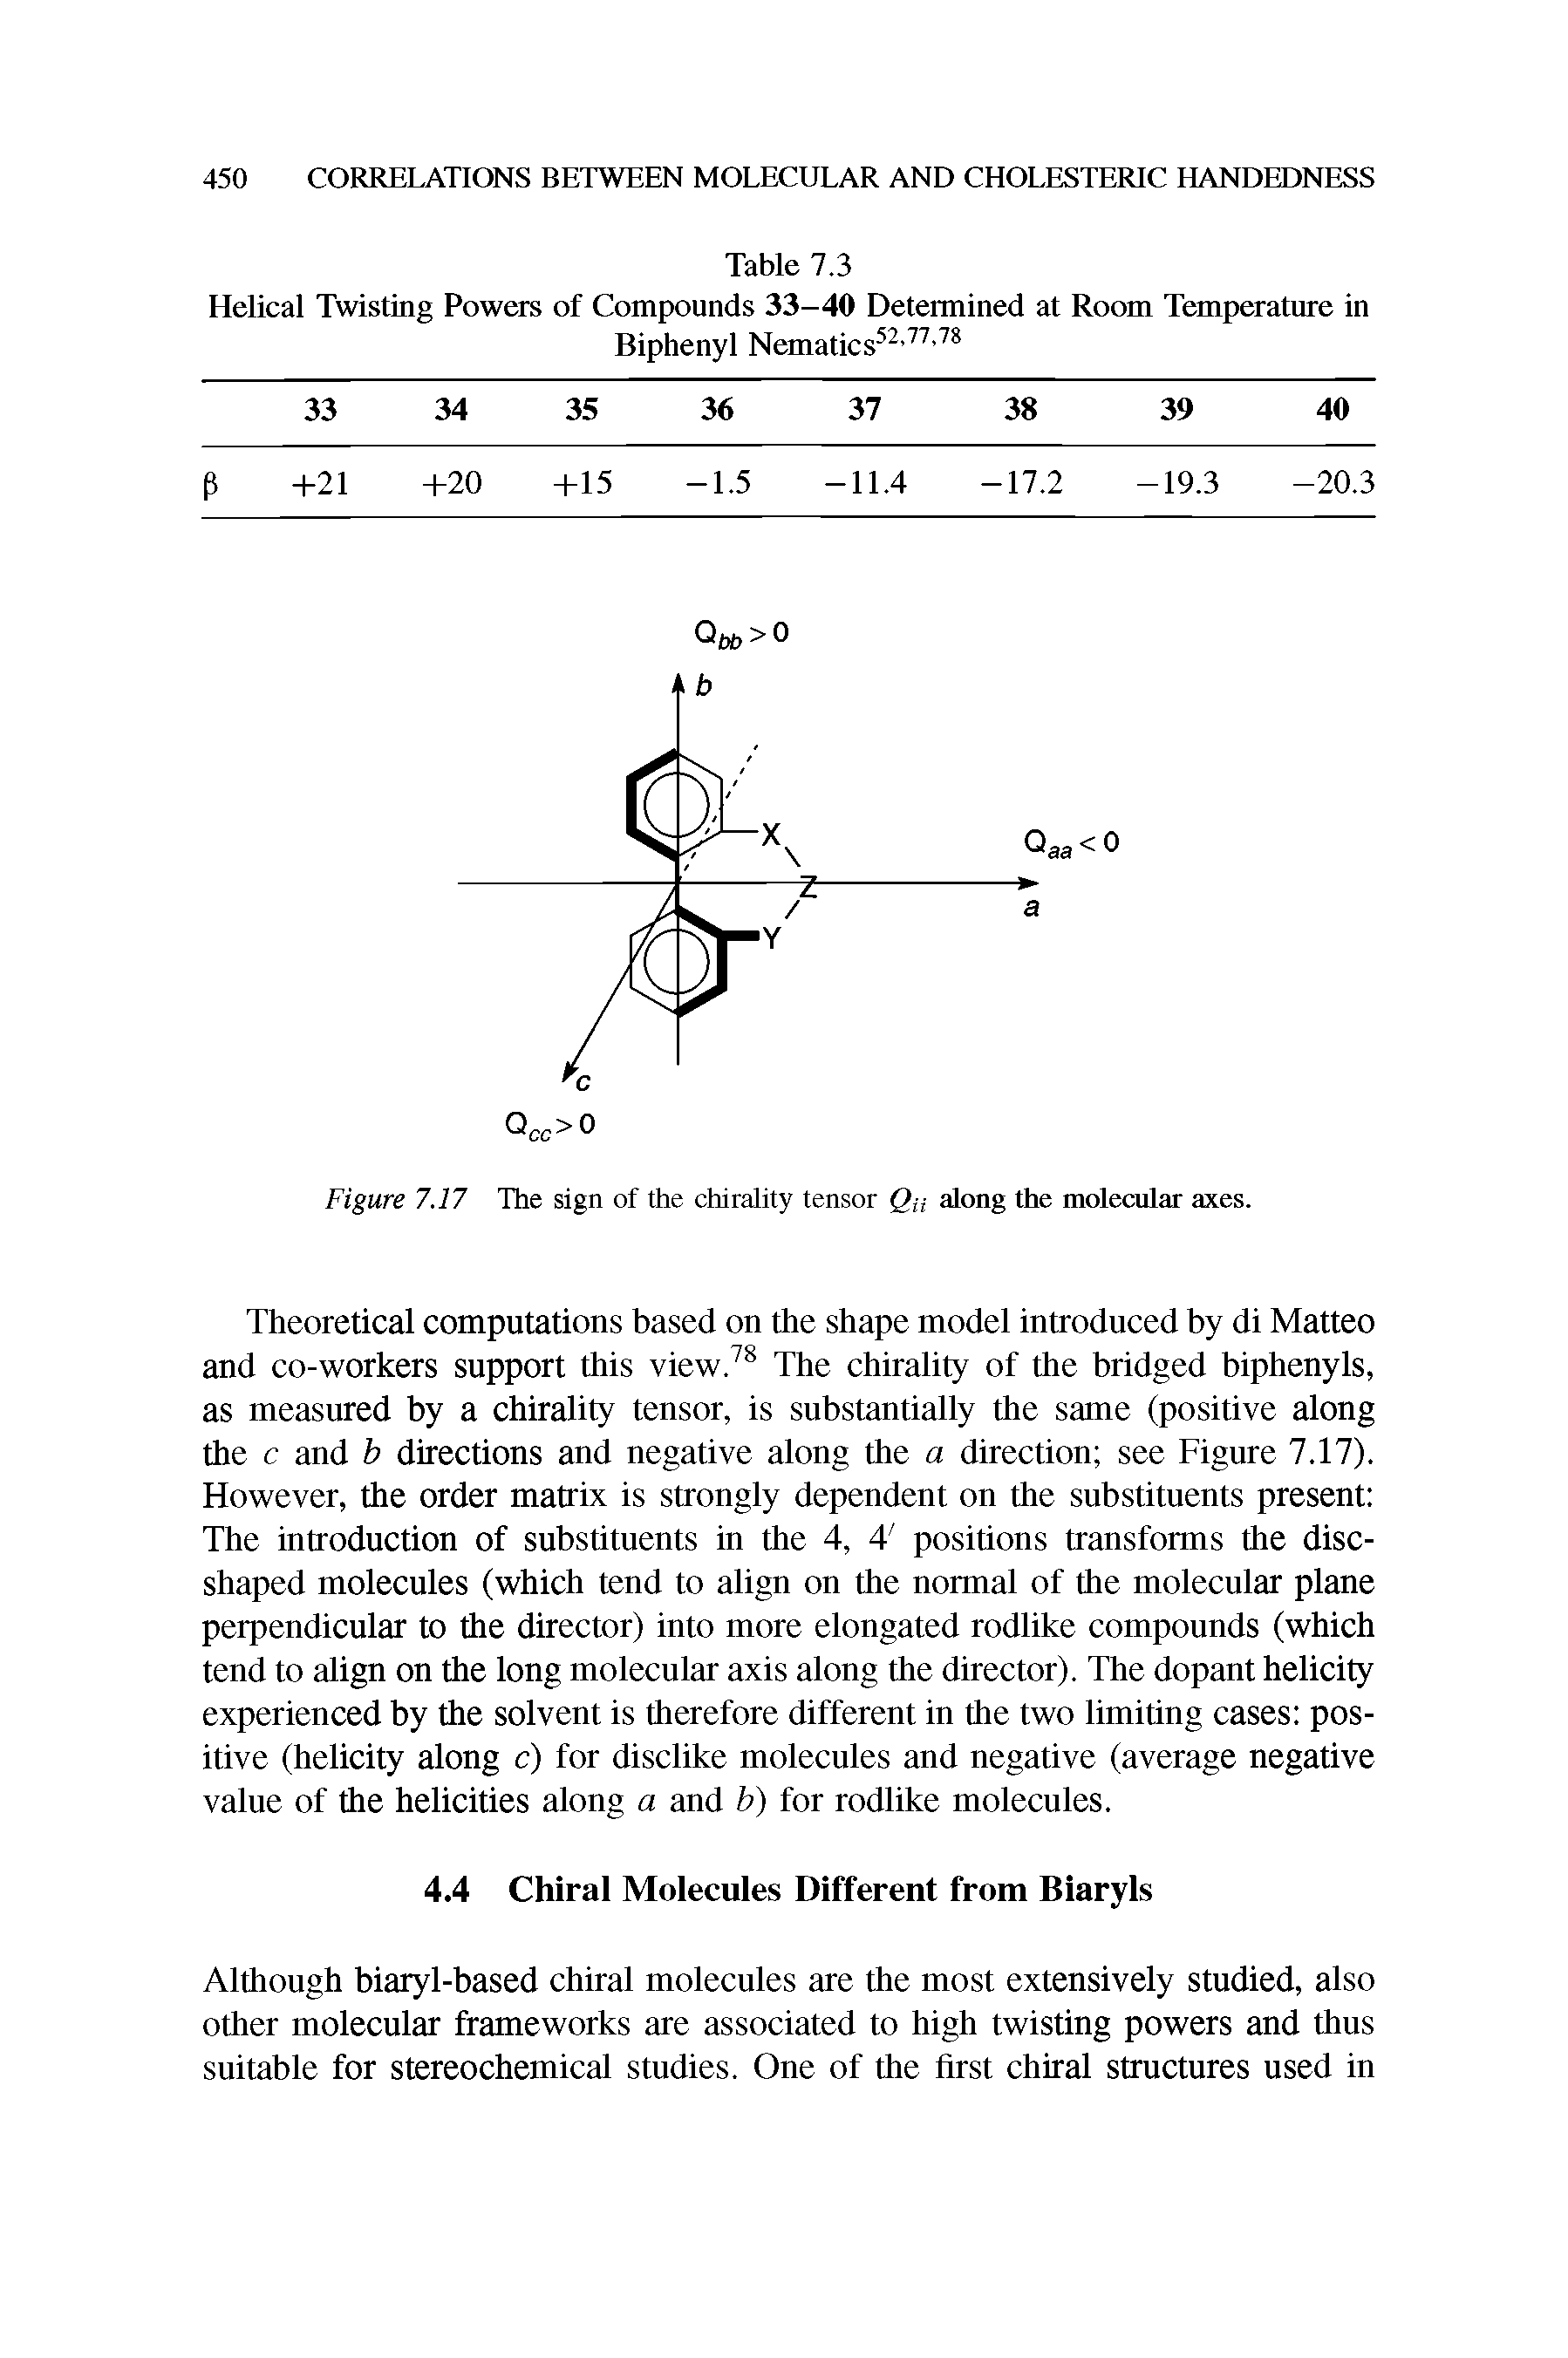 Figure 7.17 The sign of the chirality tensor Qu along the molecular axes.